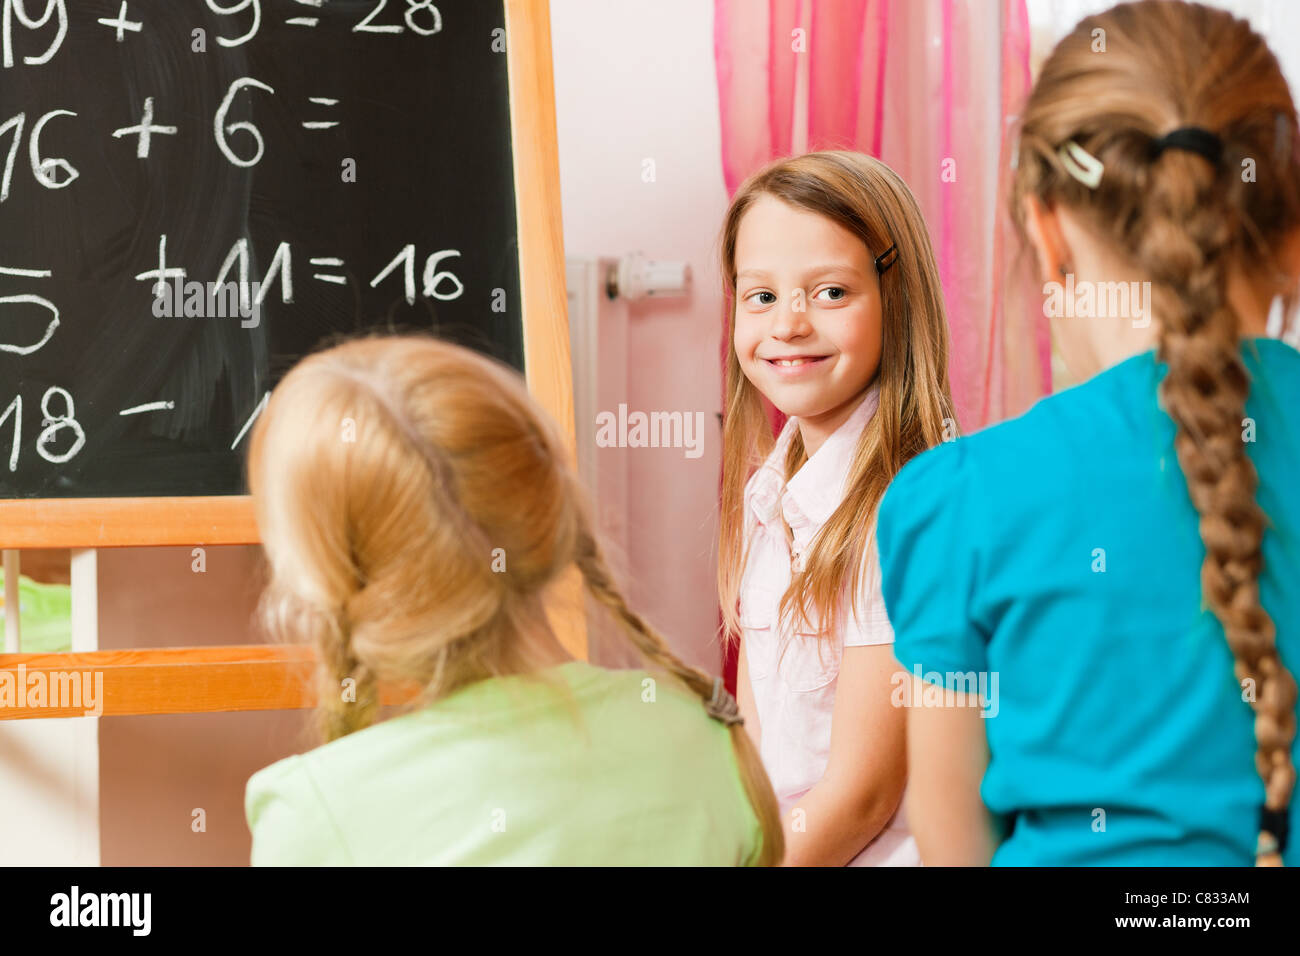 Children - sisters - playing school in their room Stock Photo